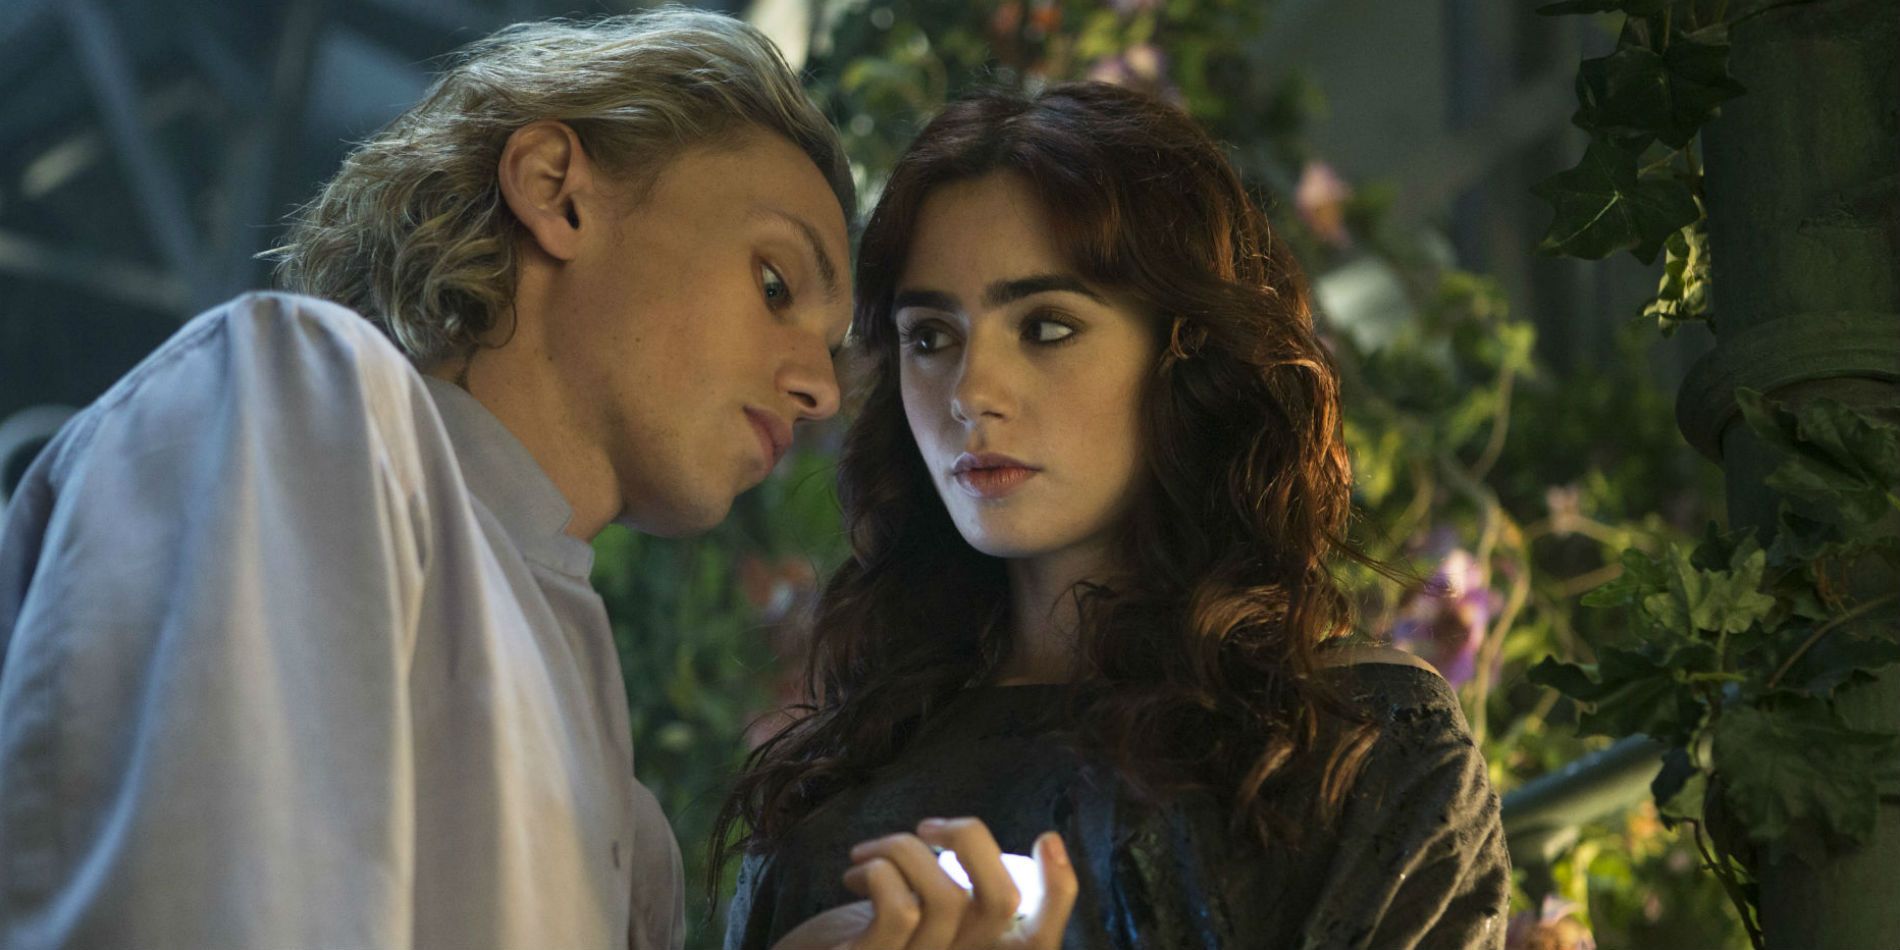 10 Best Quotes From The Mortal Instruments Books